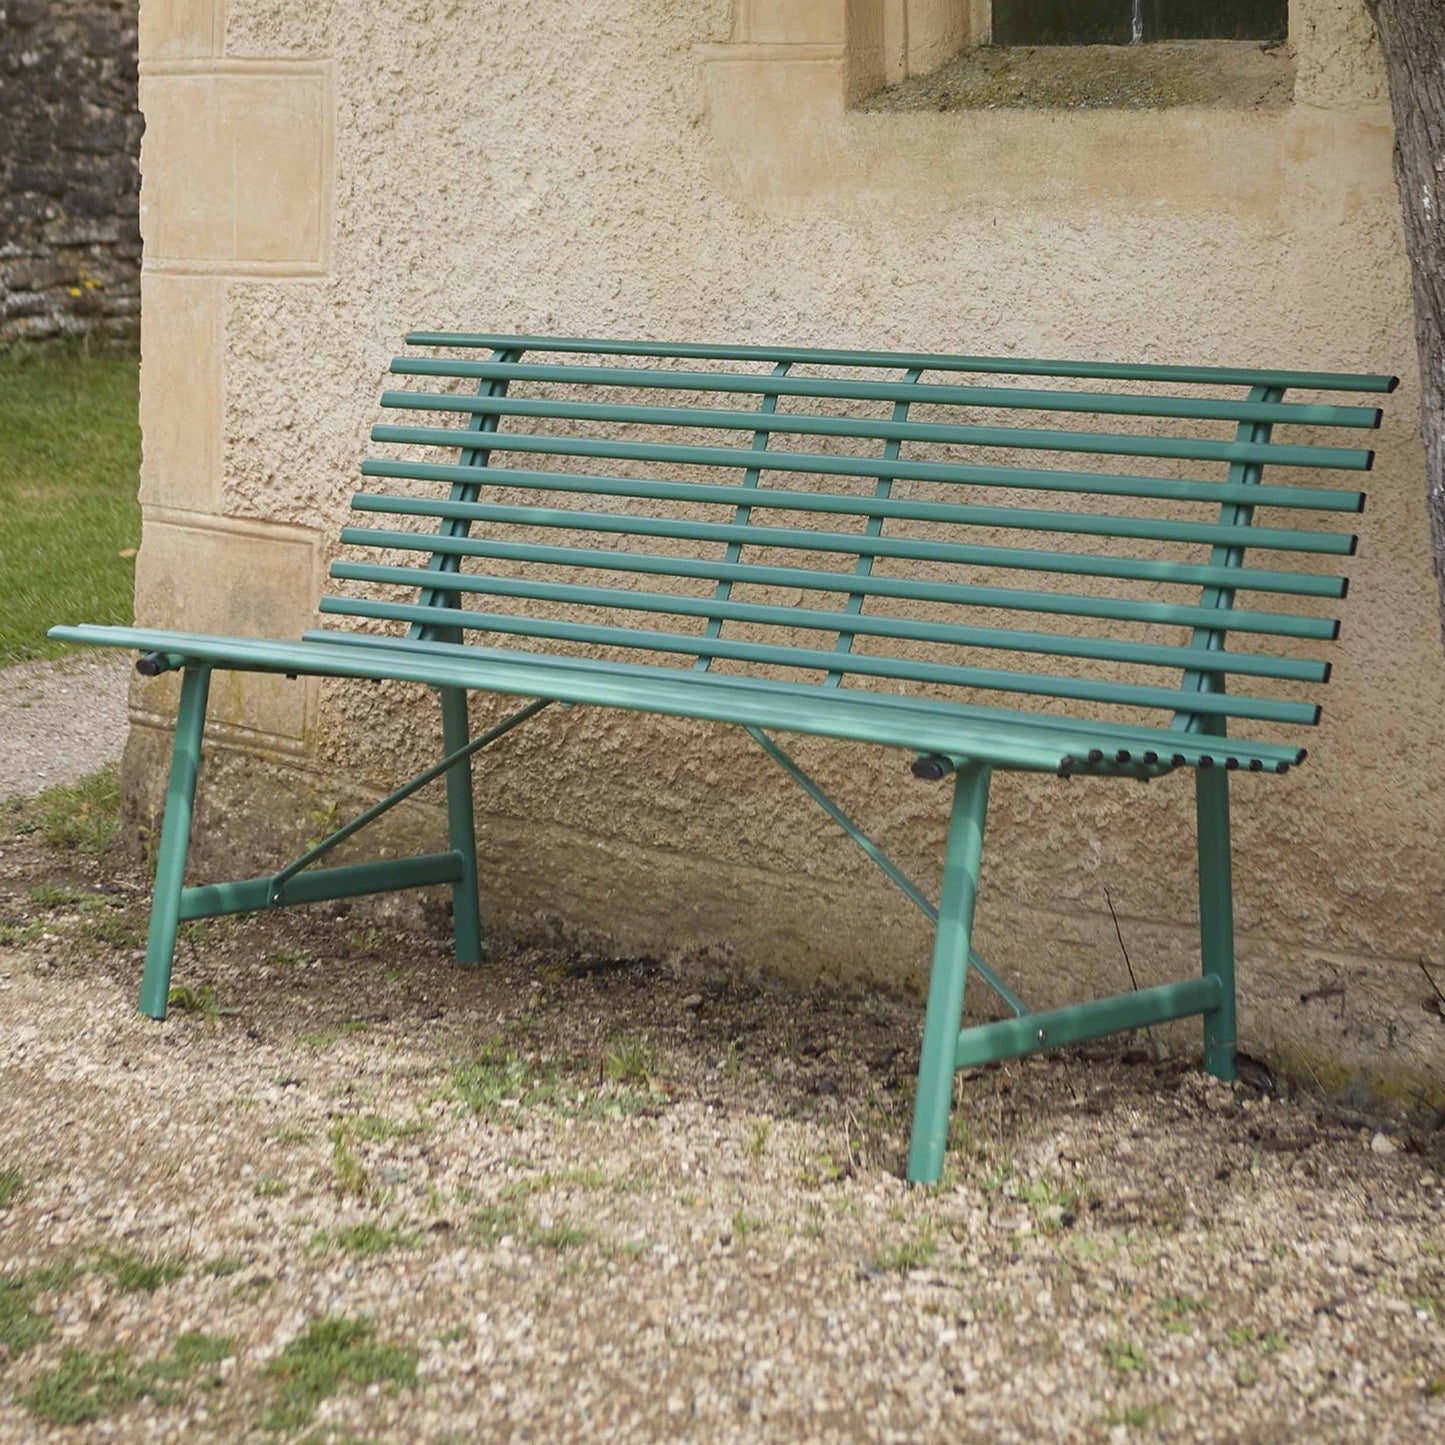 Richmond Outdoor Bench in Foliage Green Steel by Garden Trading